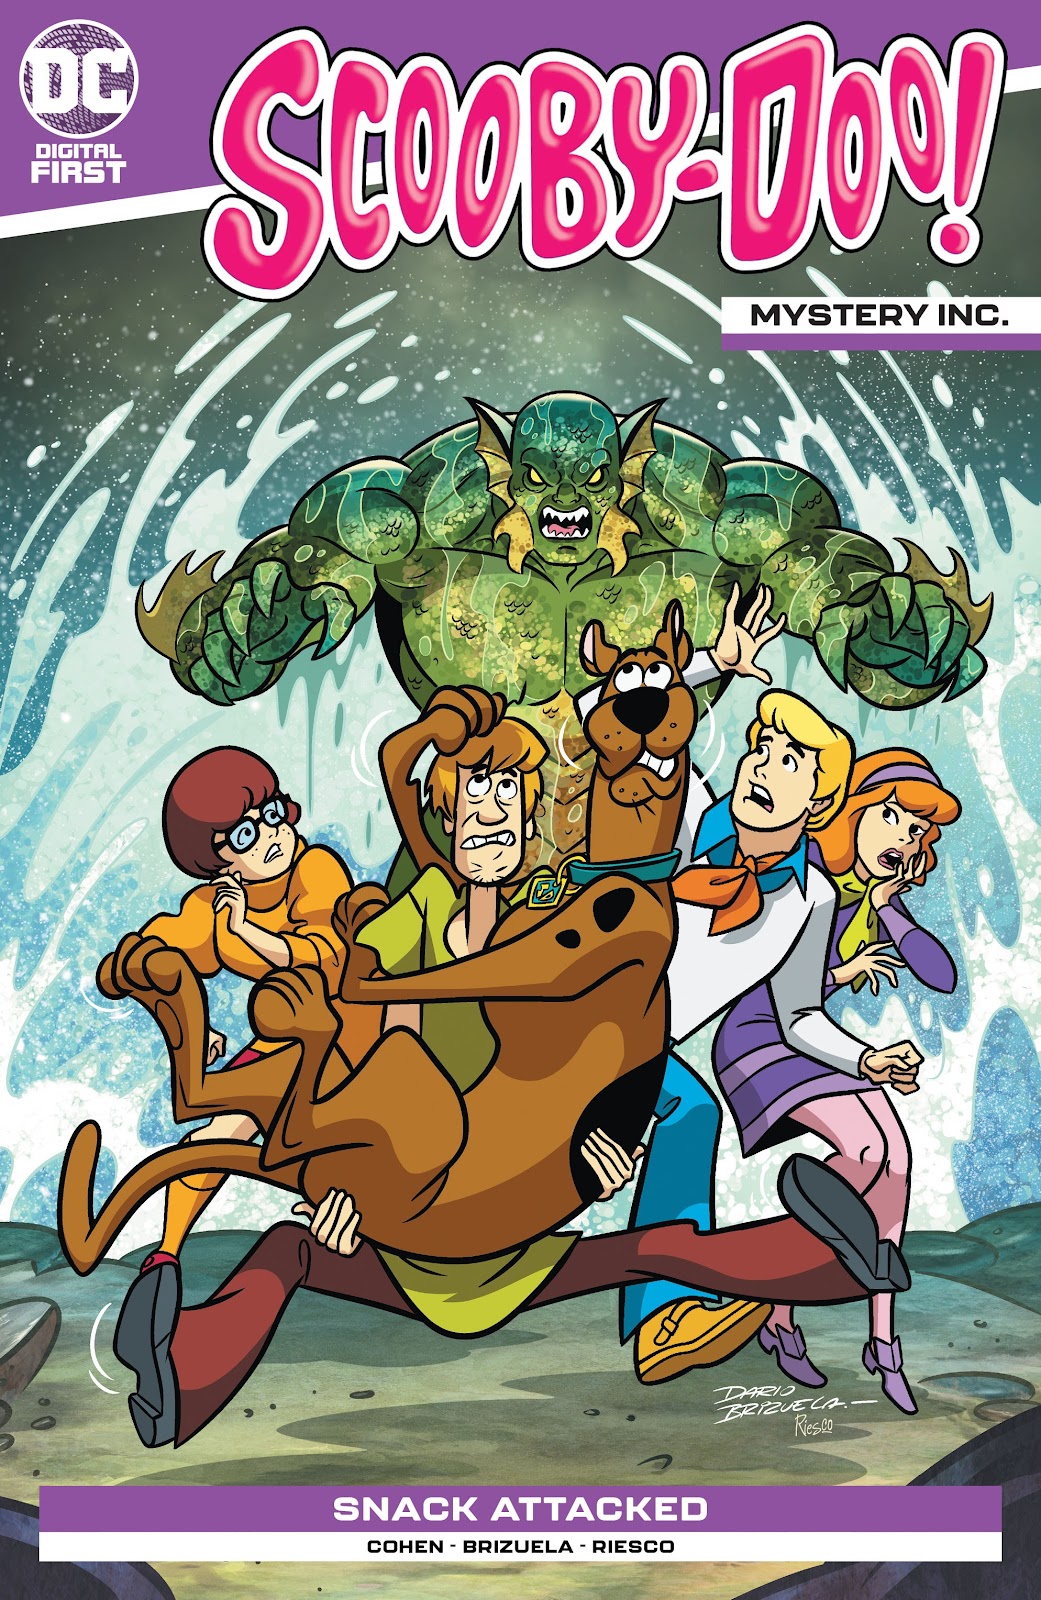 Scooby Doo Mystery Incorporated Porn - Scooby Doo Mystery Inc 1 | Read Scooby Doo Mystery Inc 1 comic online in  high quality. Read Full Comic online for free - Read comics online in high  quality .| READ COMIC ONLINE